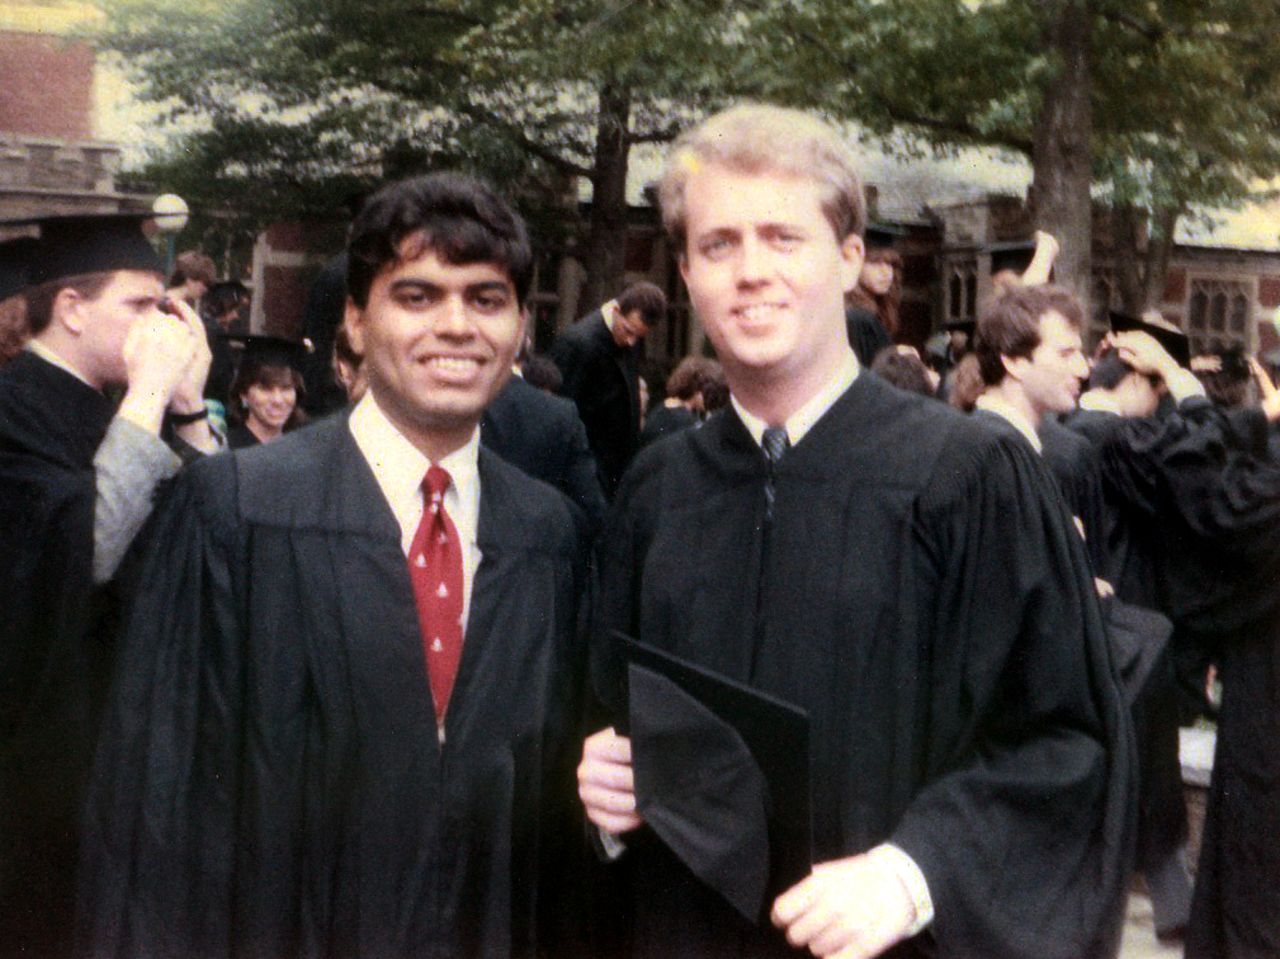 Zakaria and his roommate at college graduation.